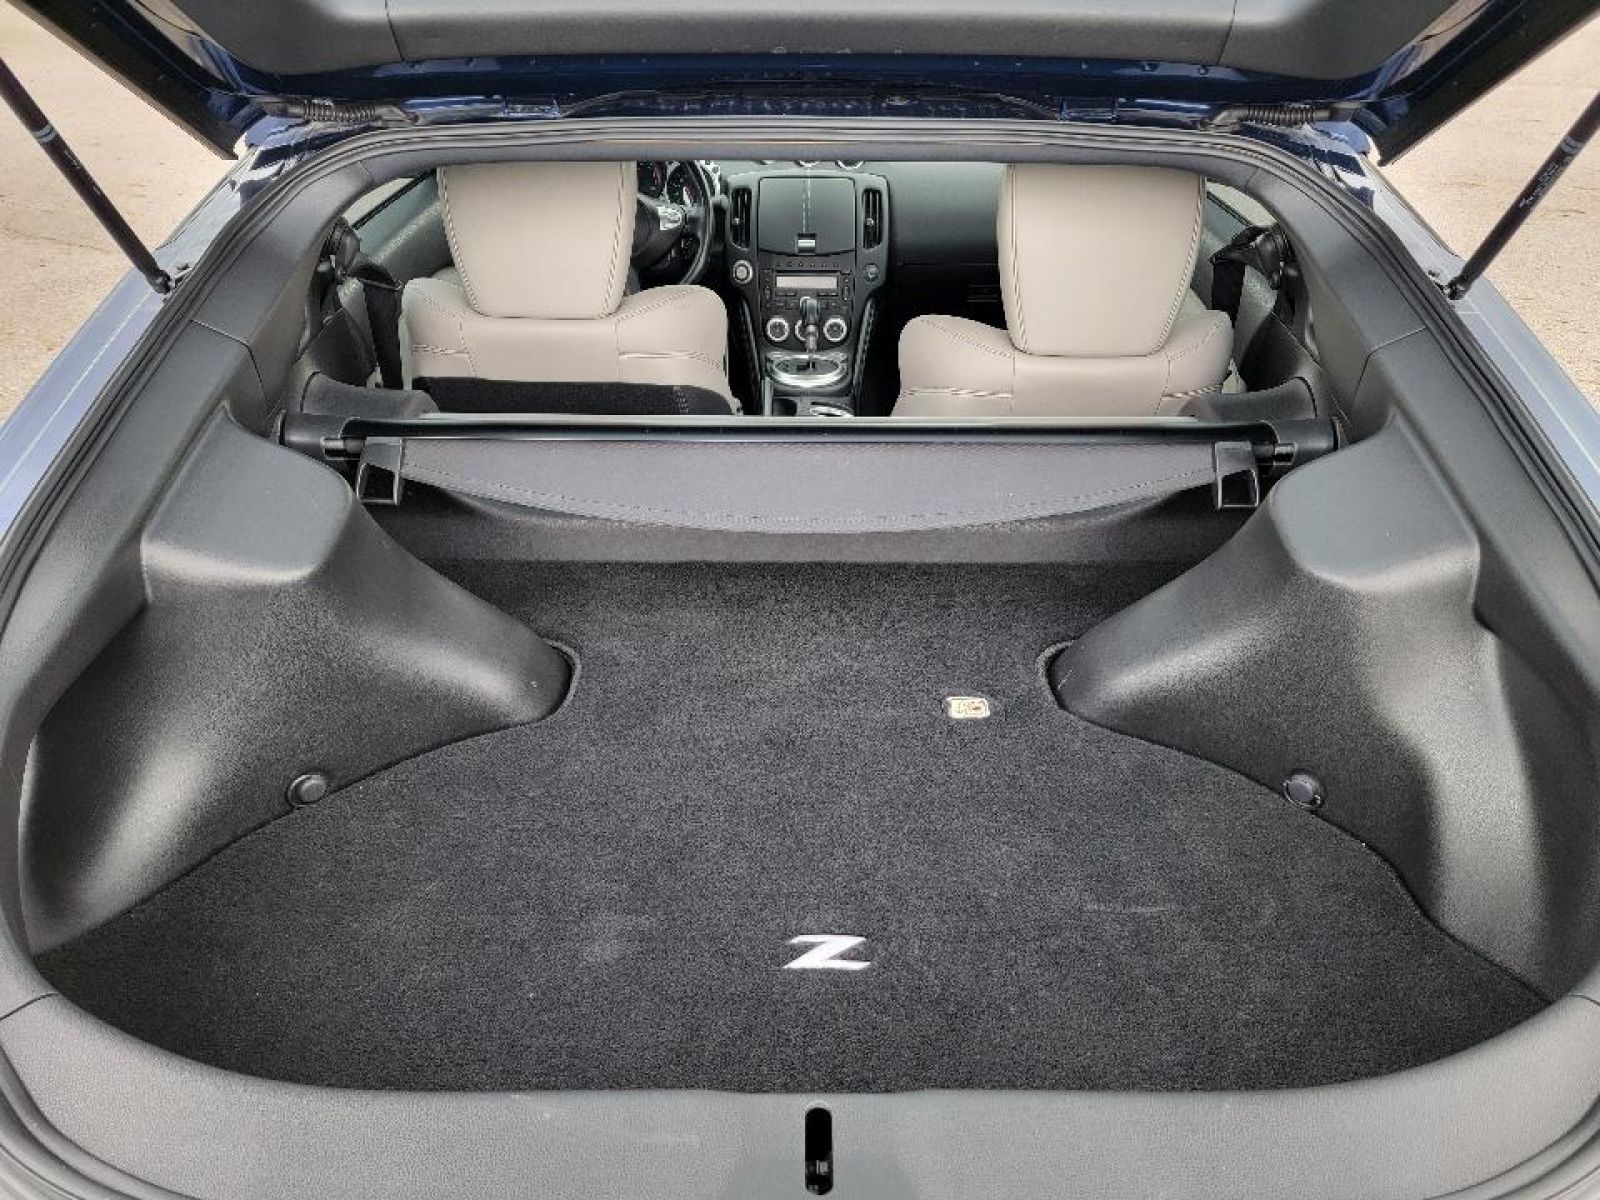 Used, 2014 Nissan 370Z Touring, Other, P0512-14